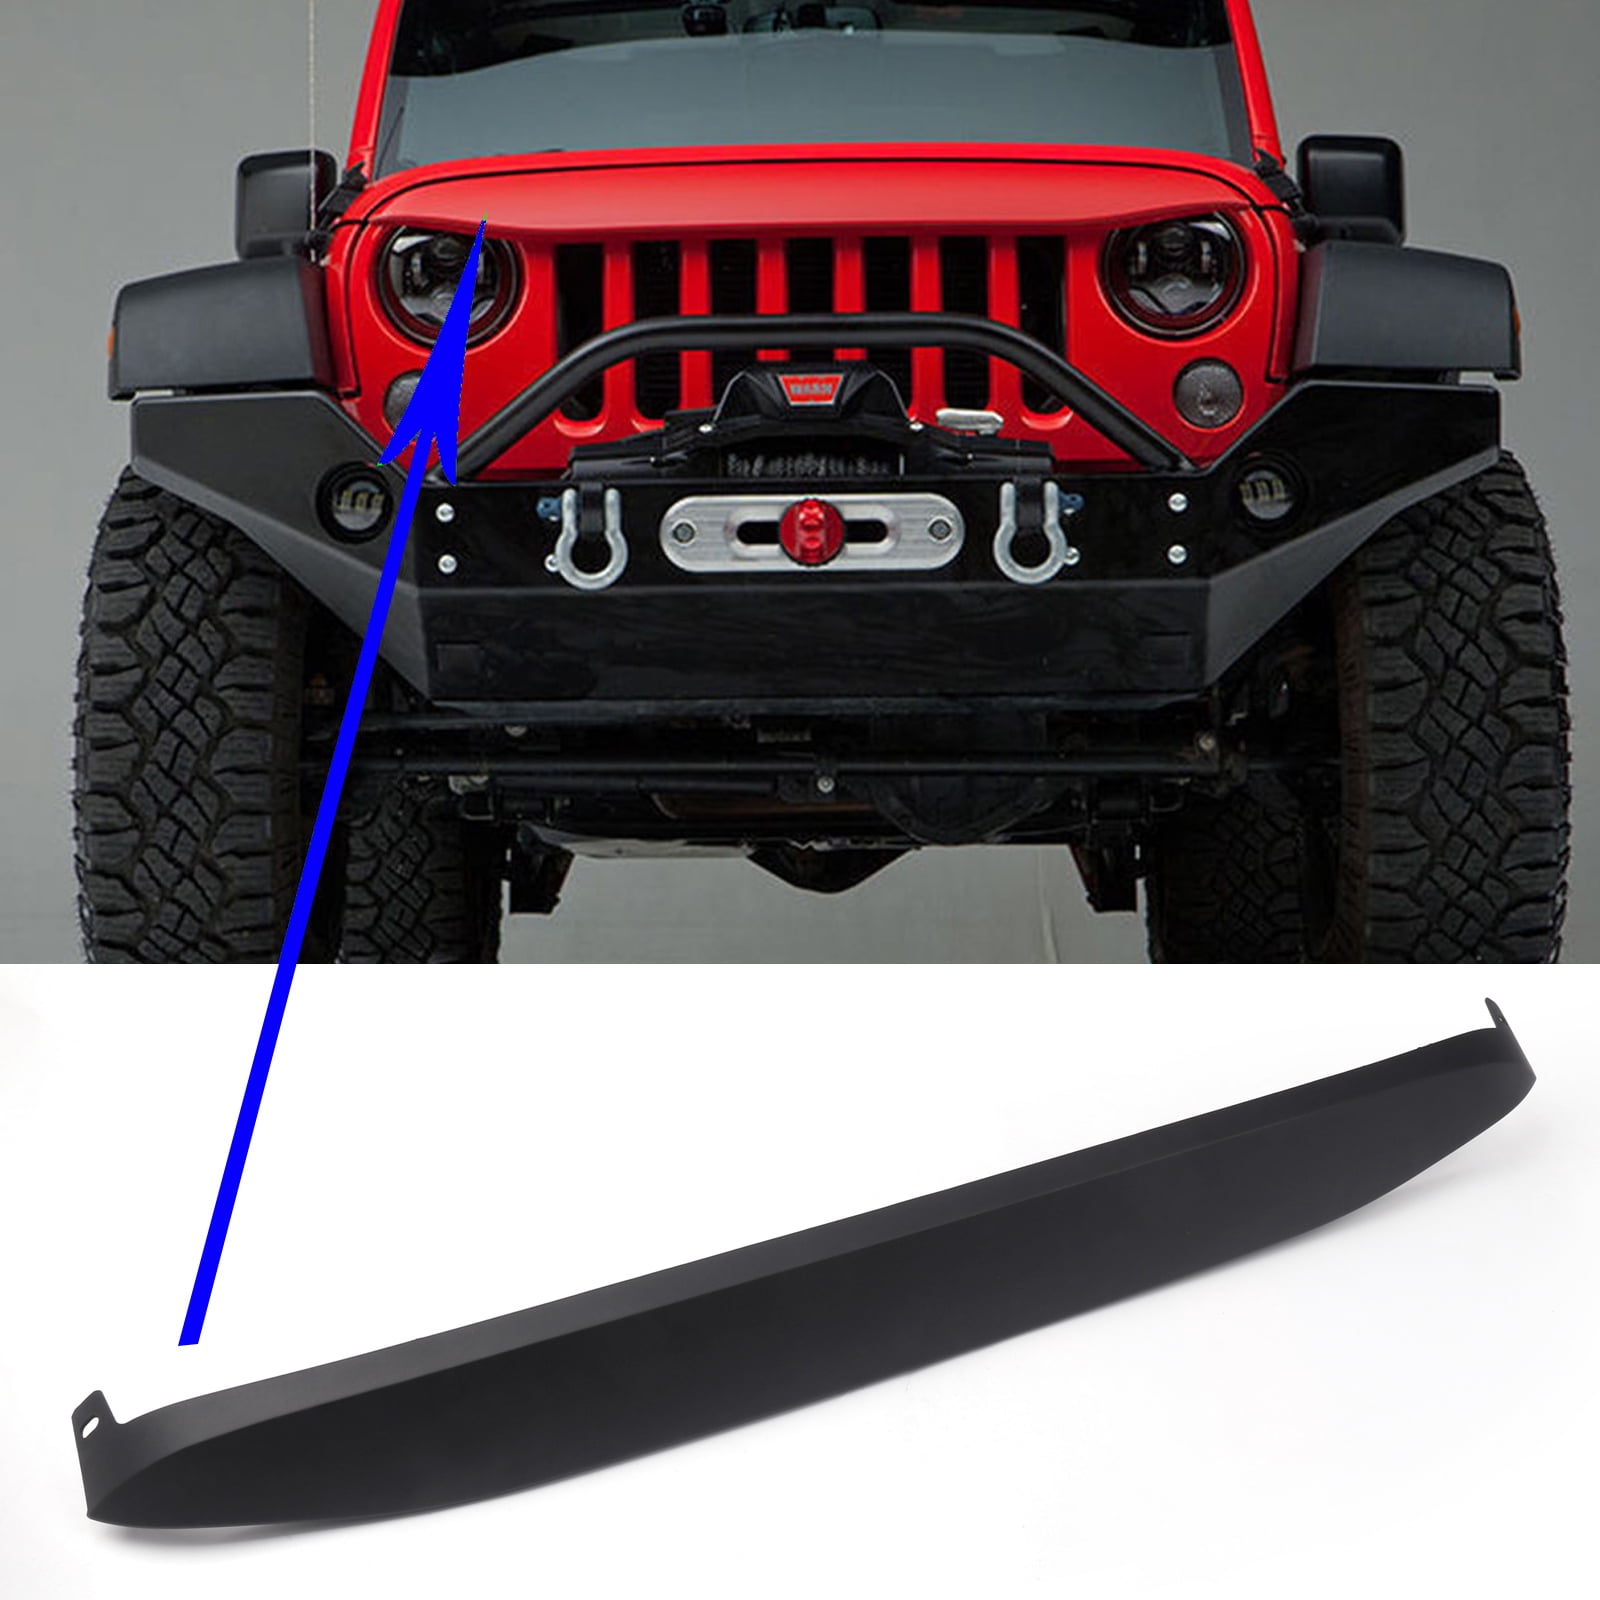 Areyourshop Nighthawk Light Brow Black Angry Front Grille Look For Jeep  Wrangler JK 07-17 